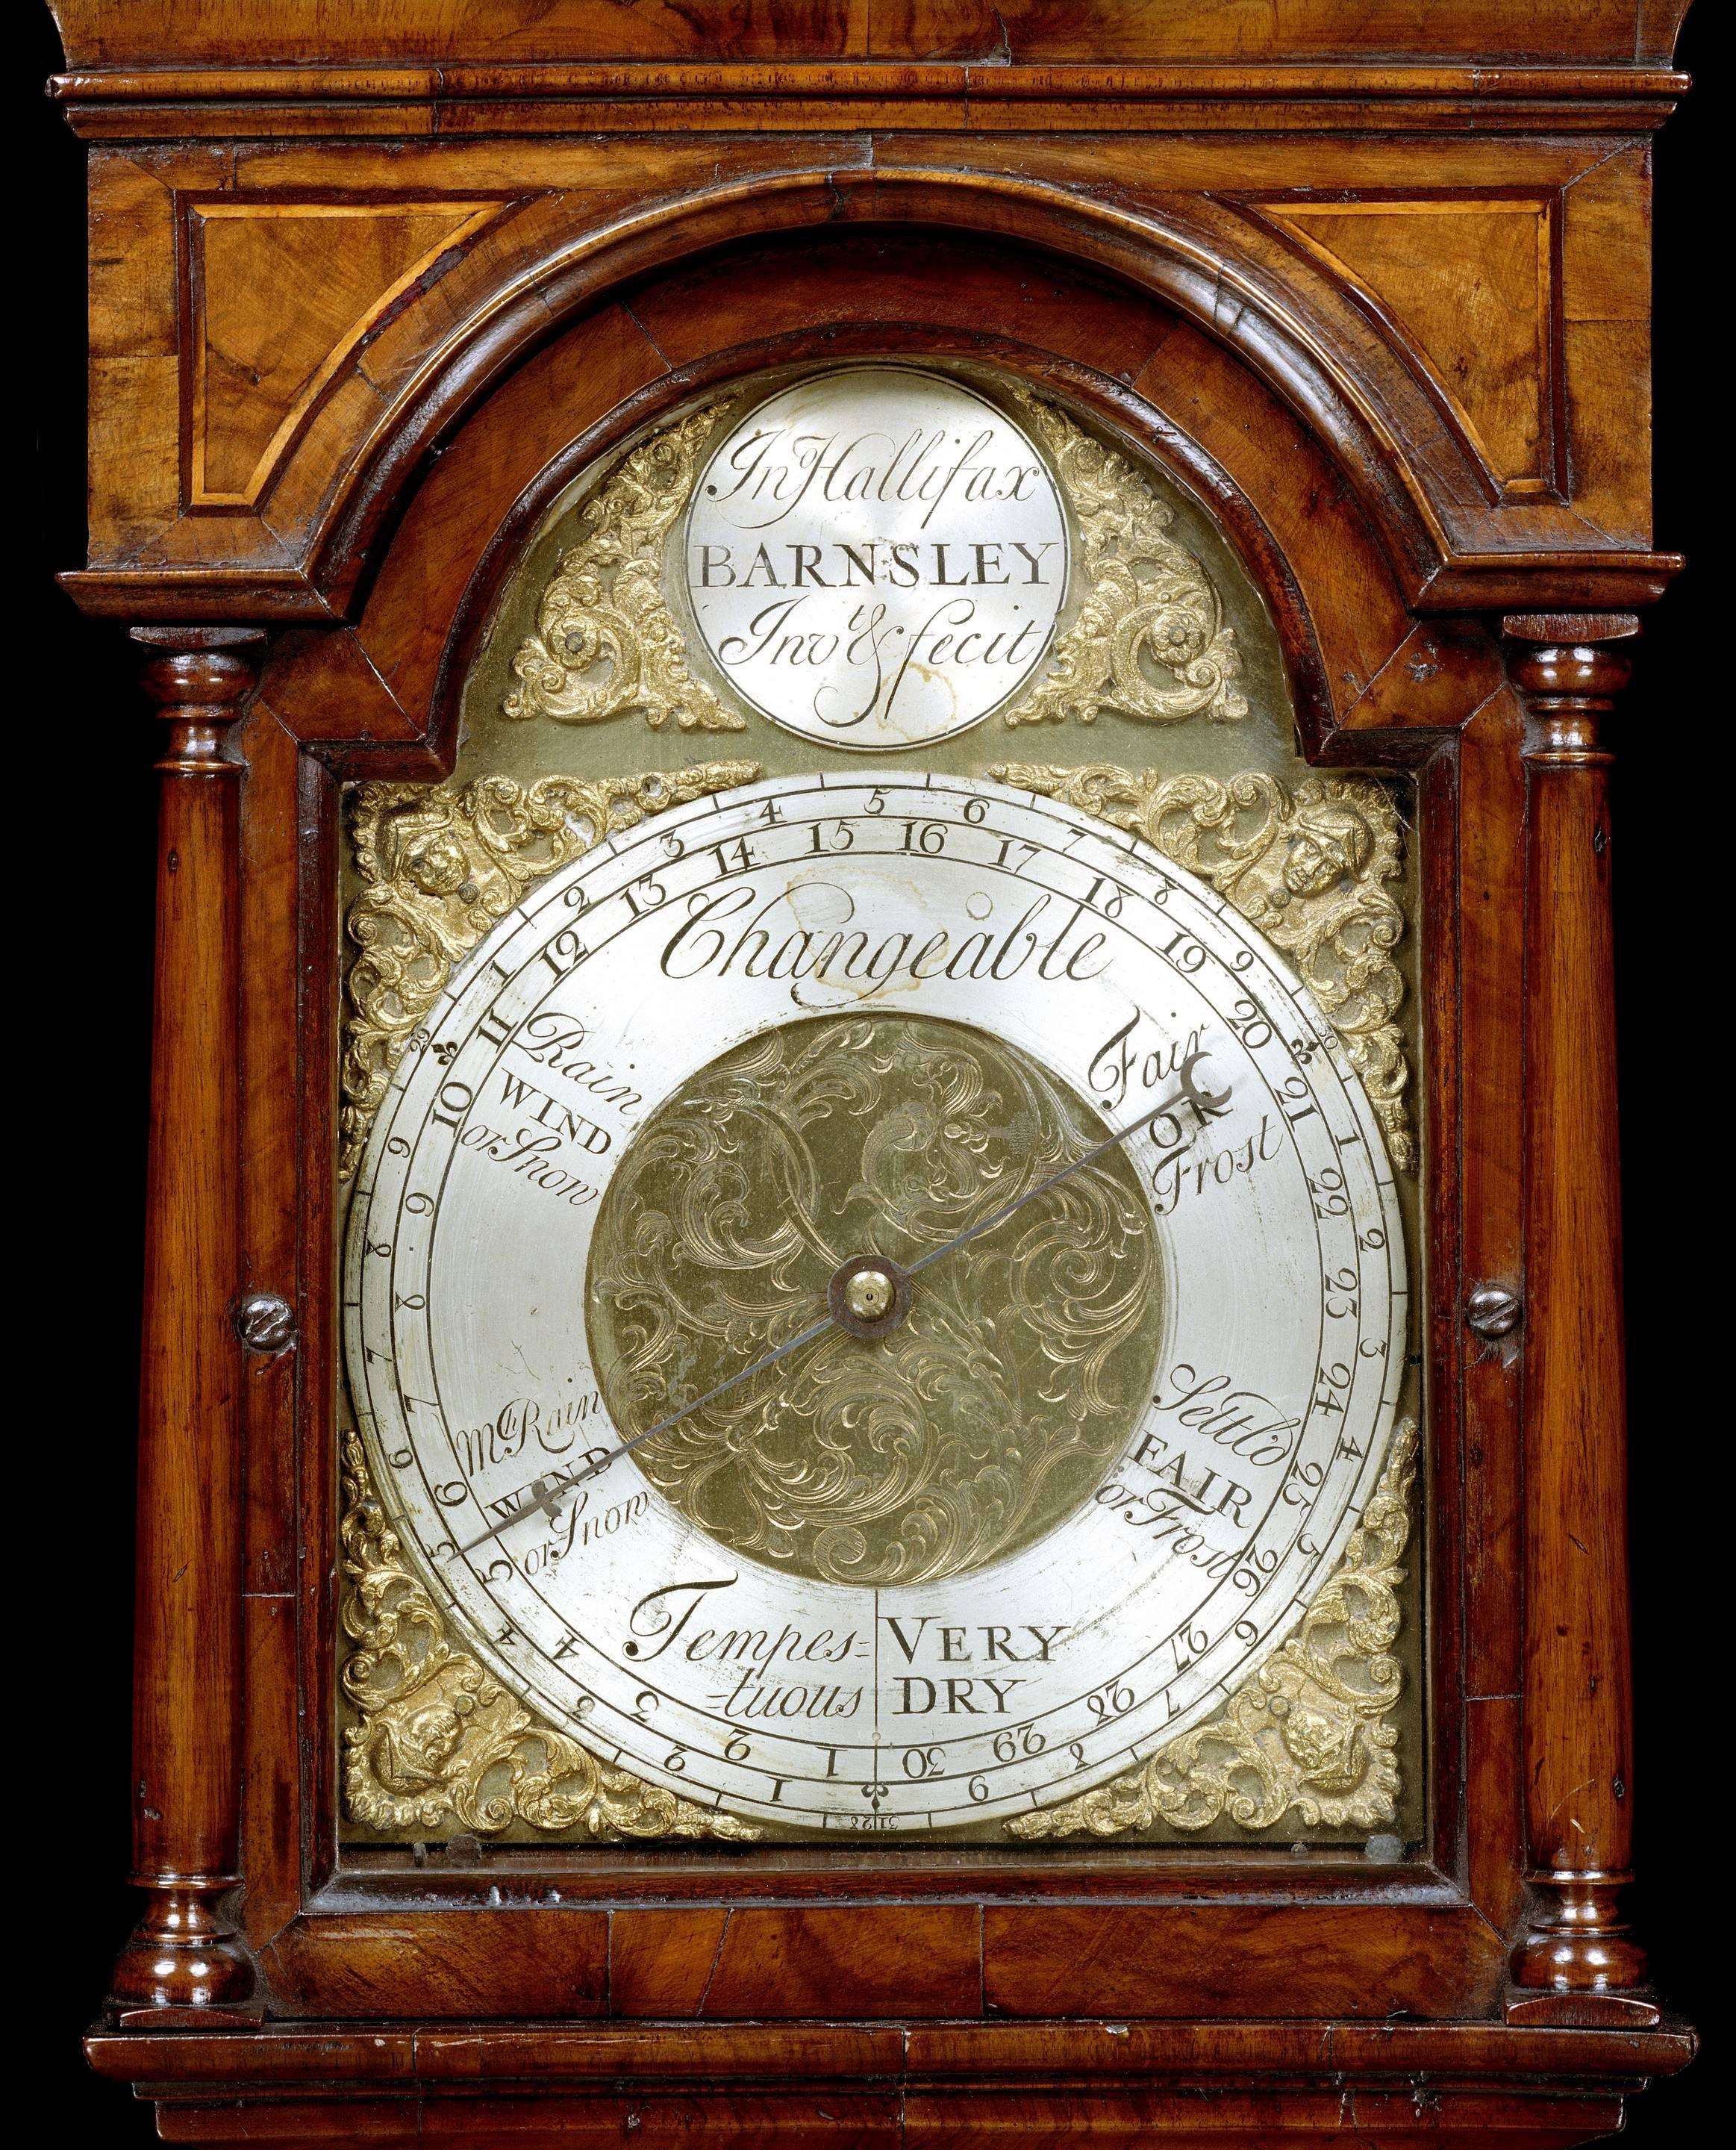 An extremely rare and important mid-18th century walnut barometer by John Hallifax of Barnsley, of distinctive long case clock shape, having a clock hood top with brass finials and glazed arched dial with a silvered chapter ring and brass spandrels